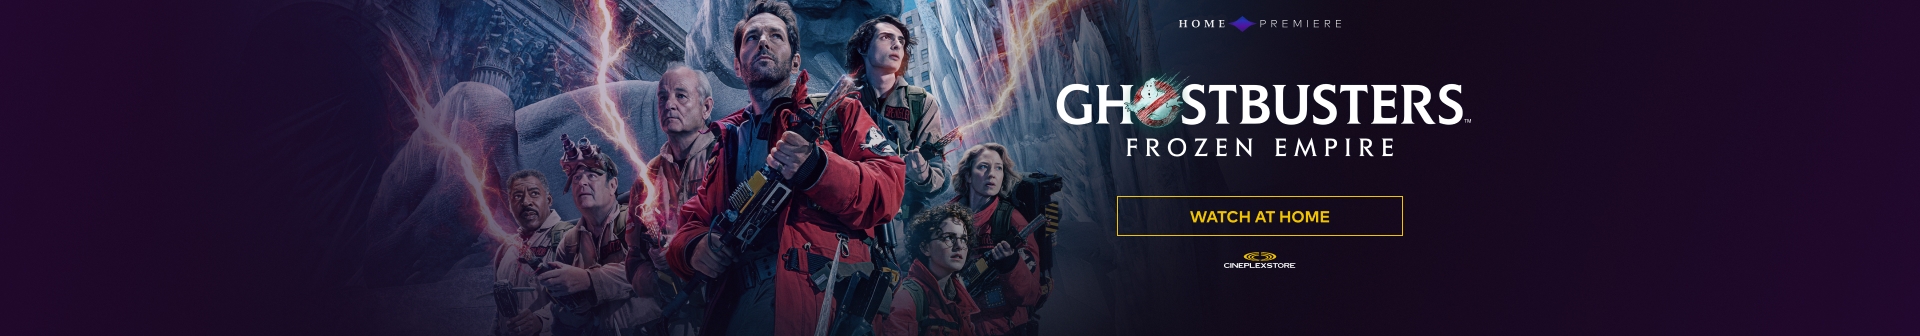 STORE: Ghostbusters: Frozen Empire